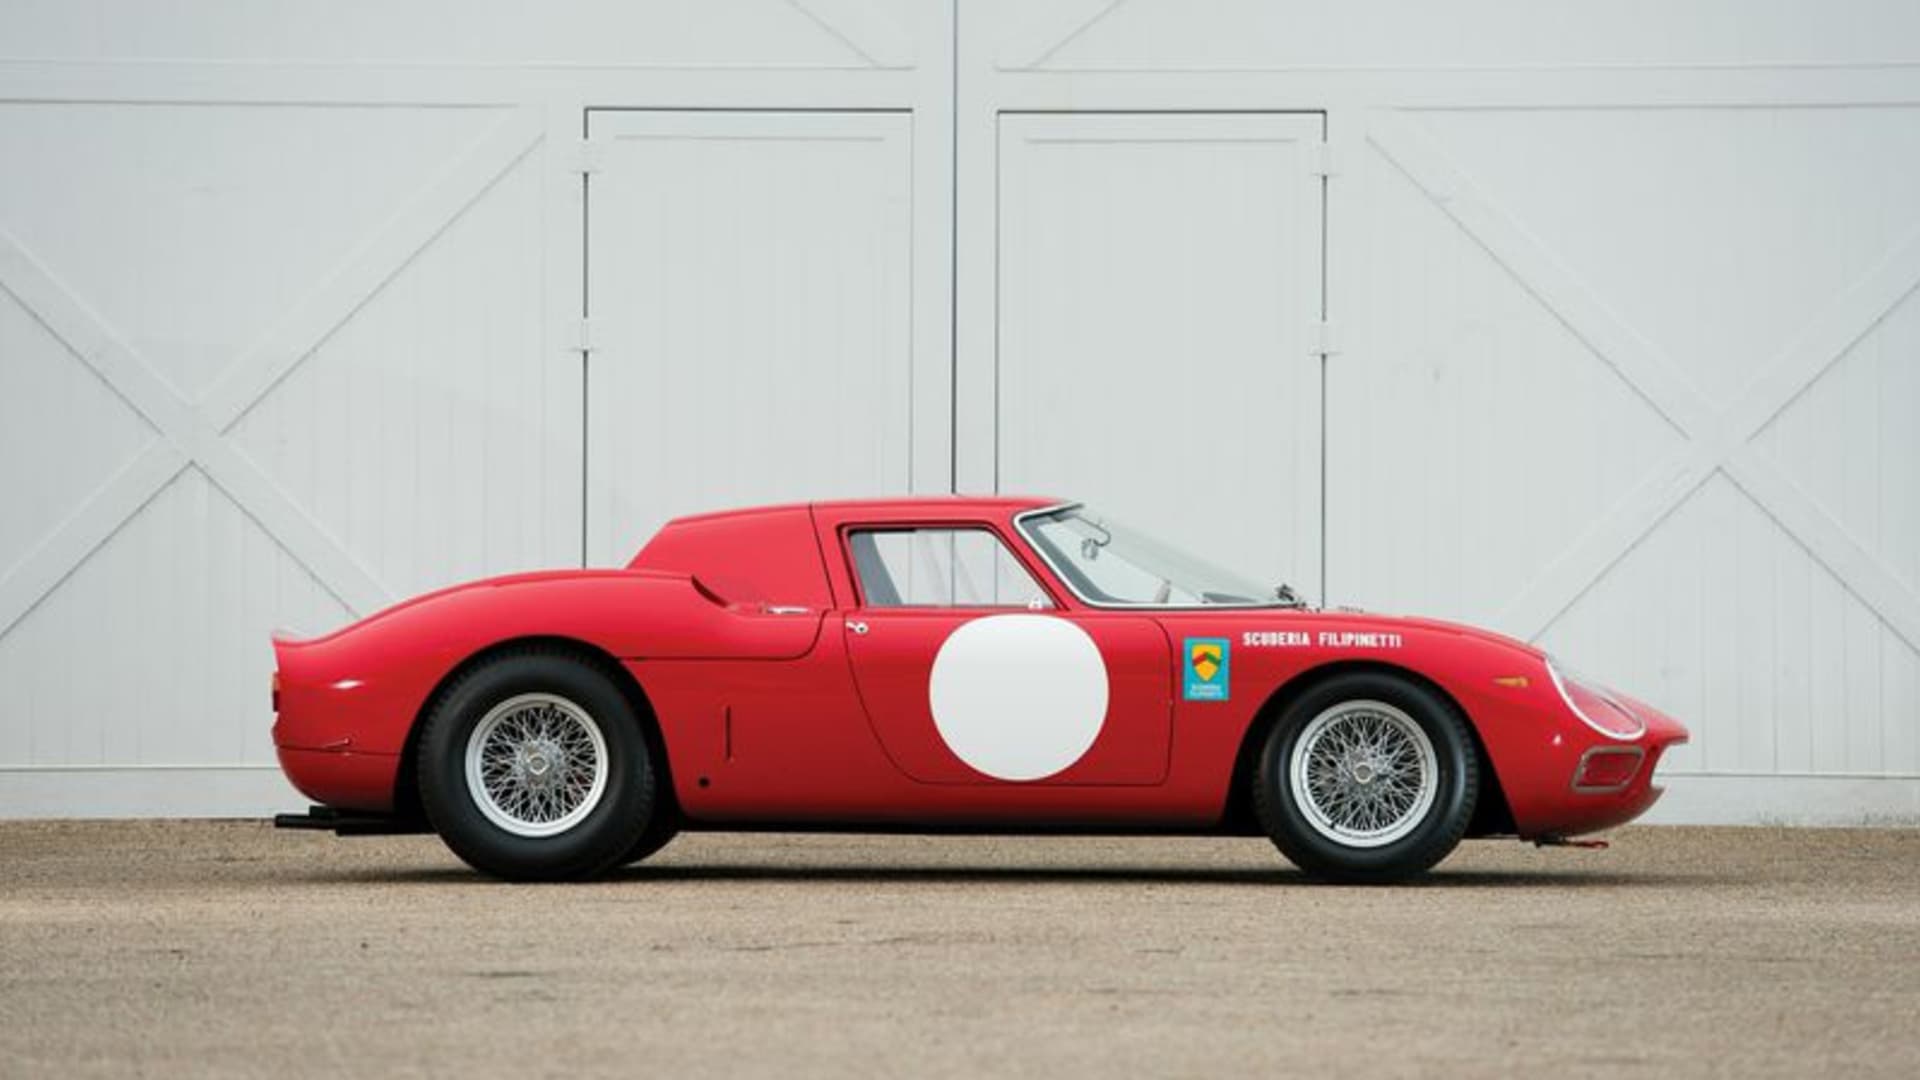 Image showing the side profile of a red 1964 Ferrari 250 LM Coupe.